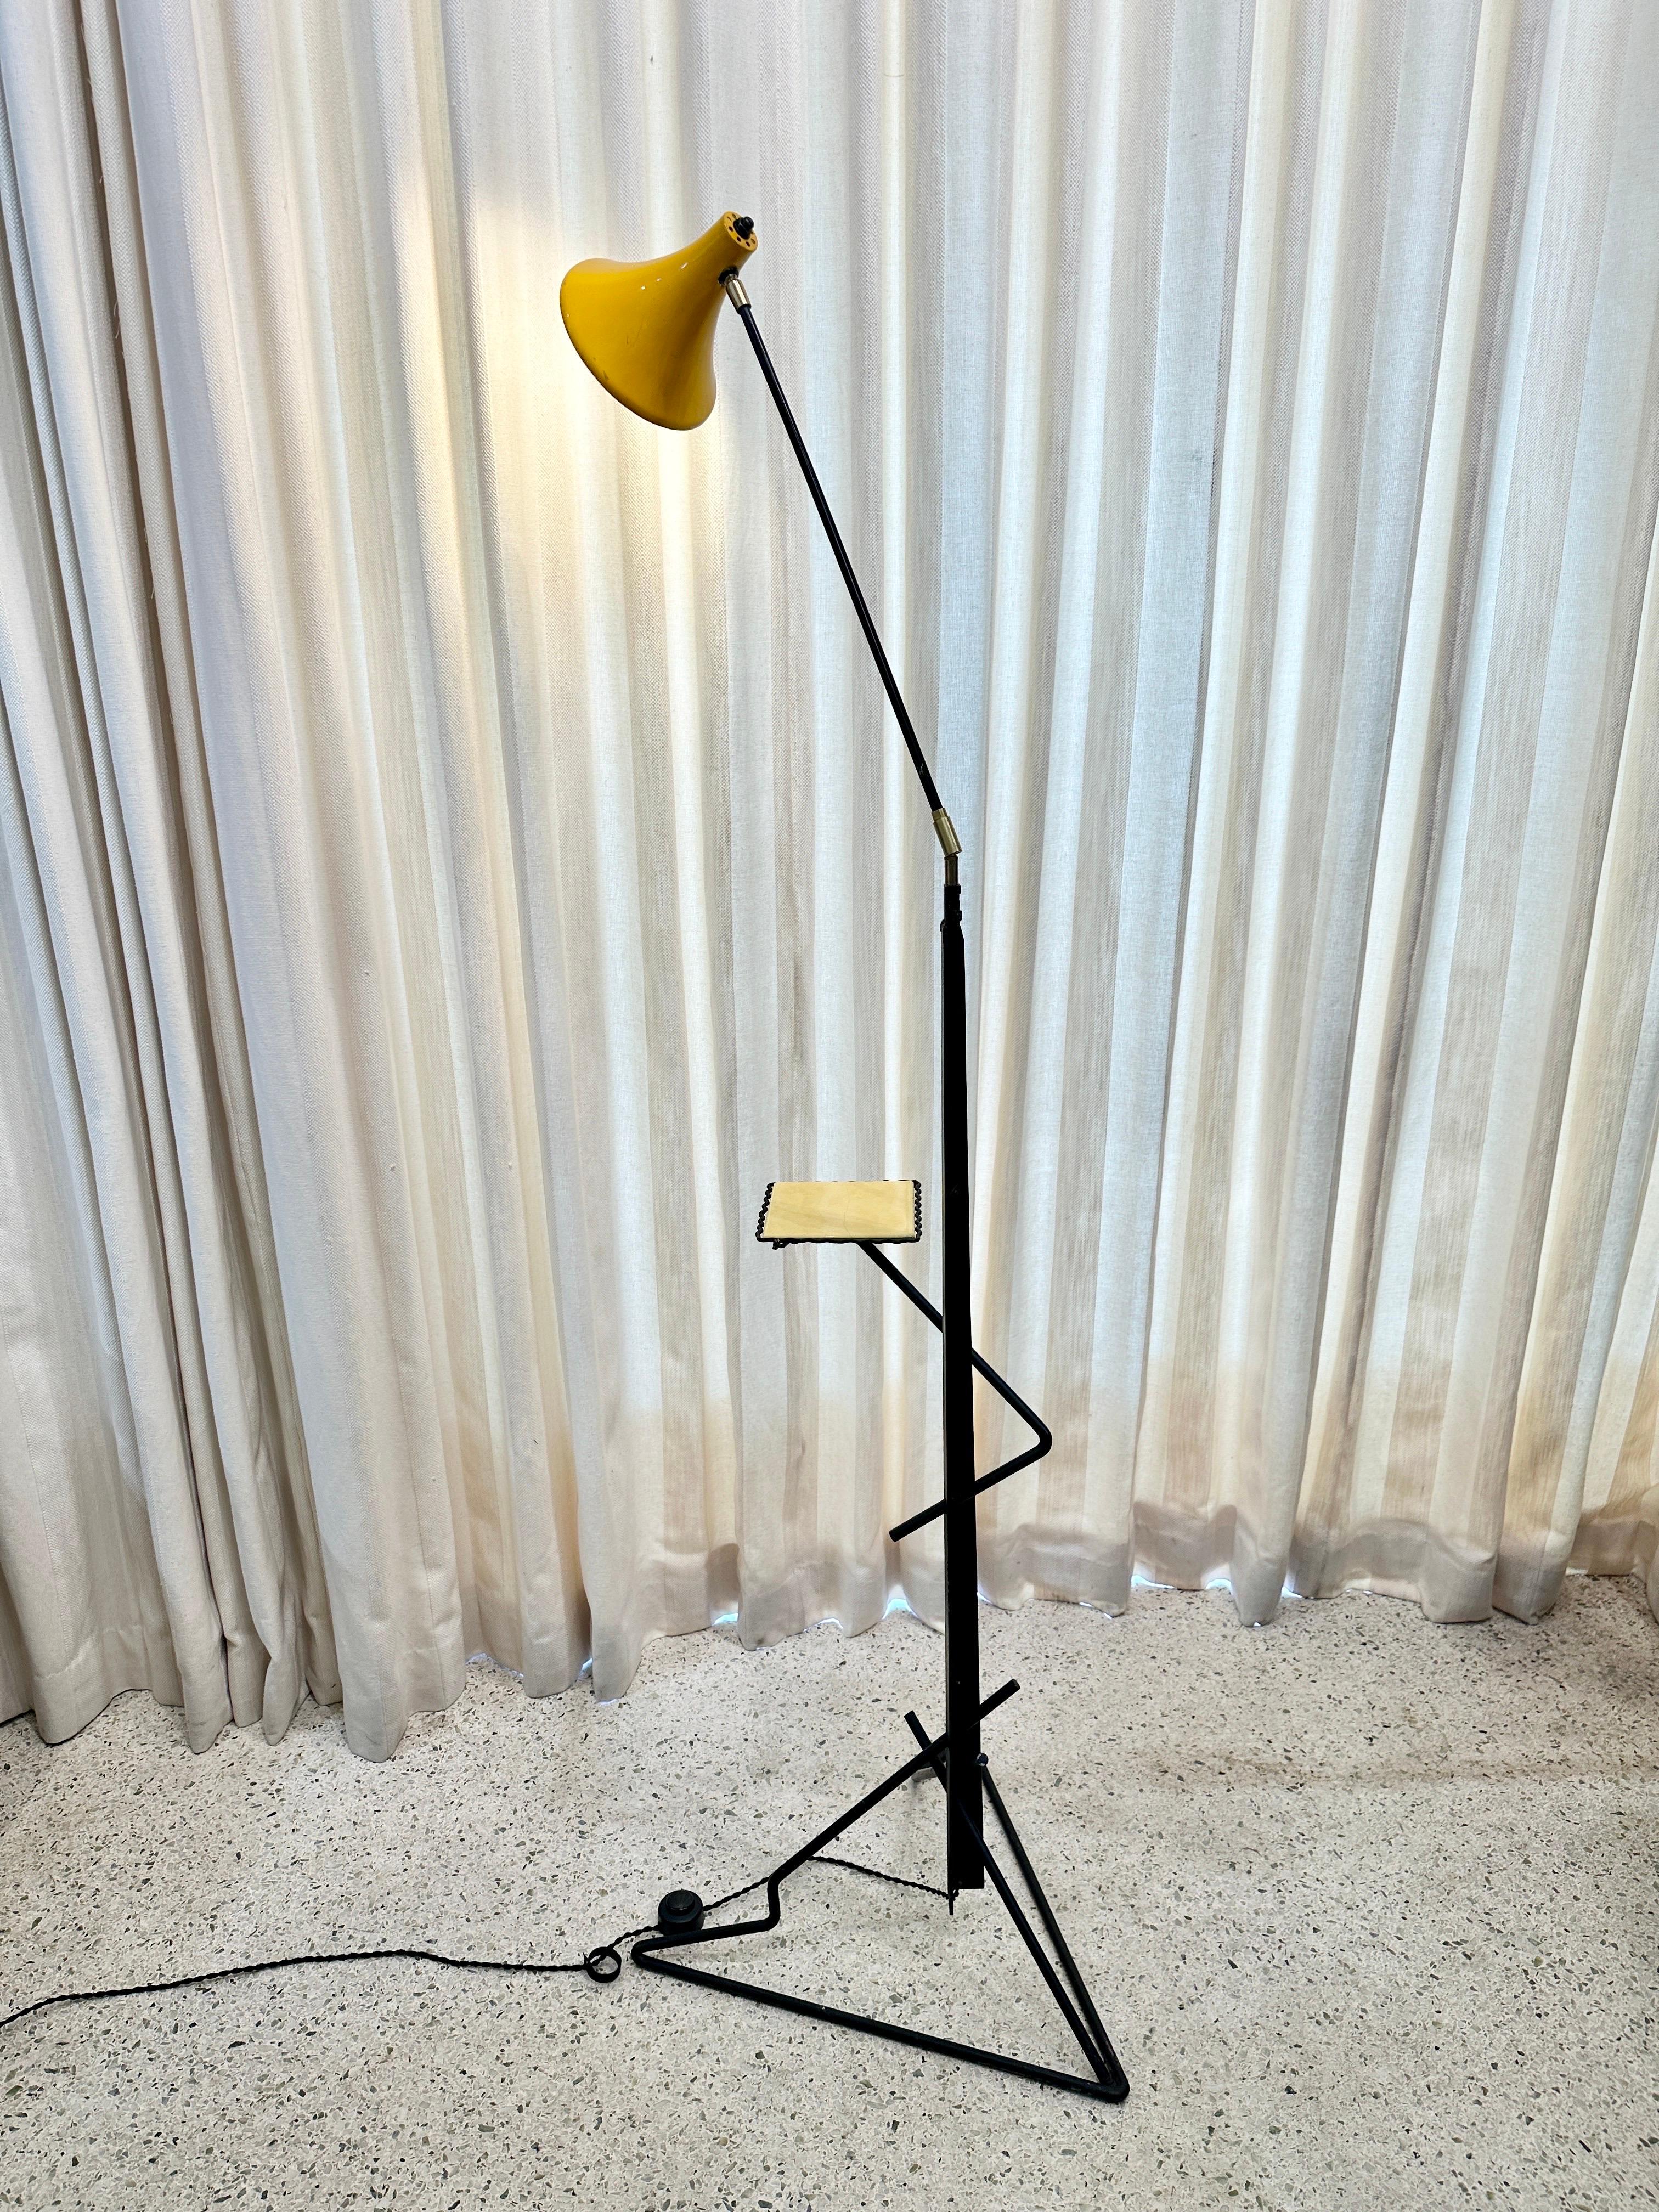 This is such a COOL modernist designed floor lamp with bent metal frame in a very geometric style, which leads to a practical petite table for tea cup or a book.  The articulating arm and shade are adjustable for perfect illumination in your space. 